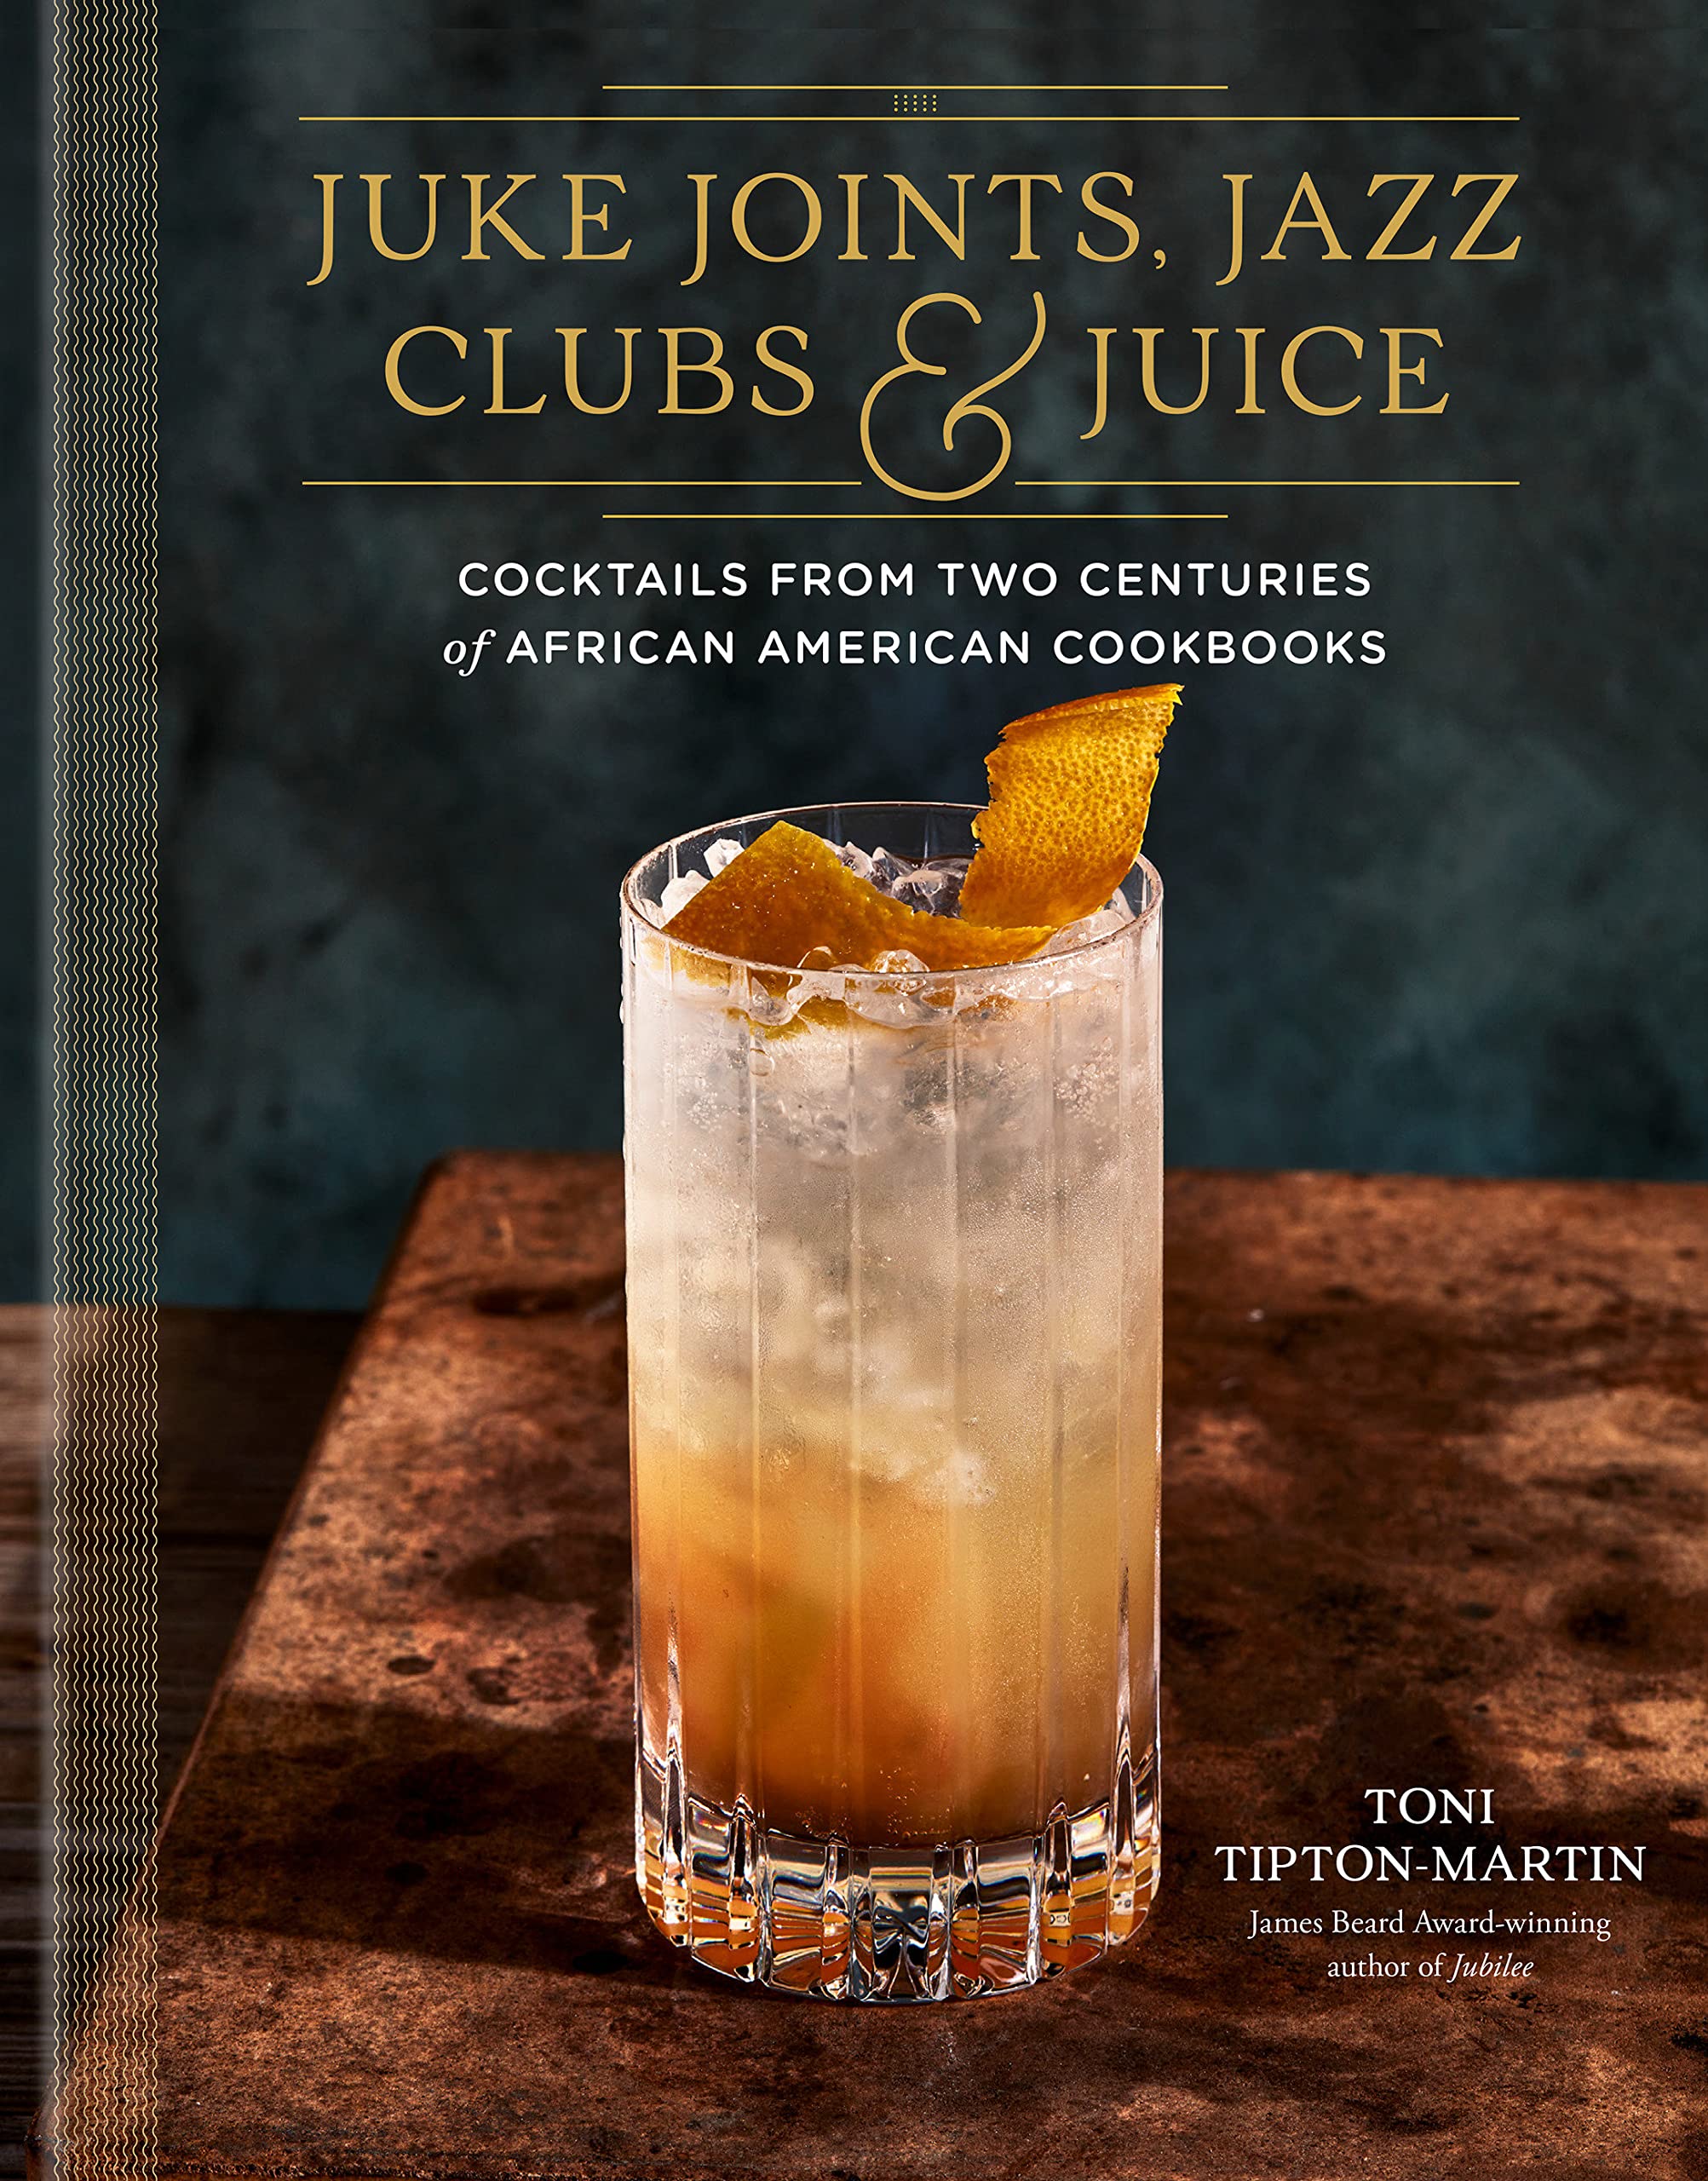 Juke Joints, Jazz Clubs, and Juice: A Cocktail Recipe Book (Toni Tipton-Martin) *Signed*